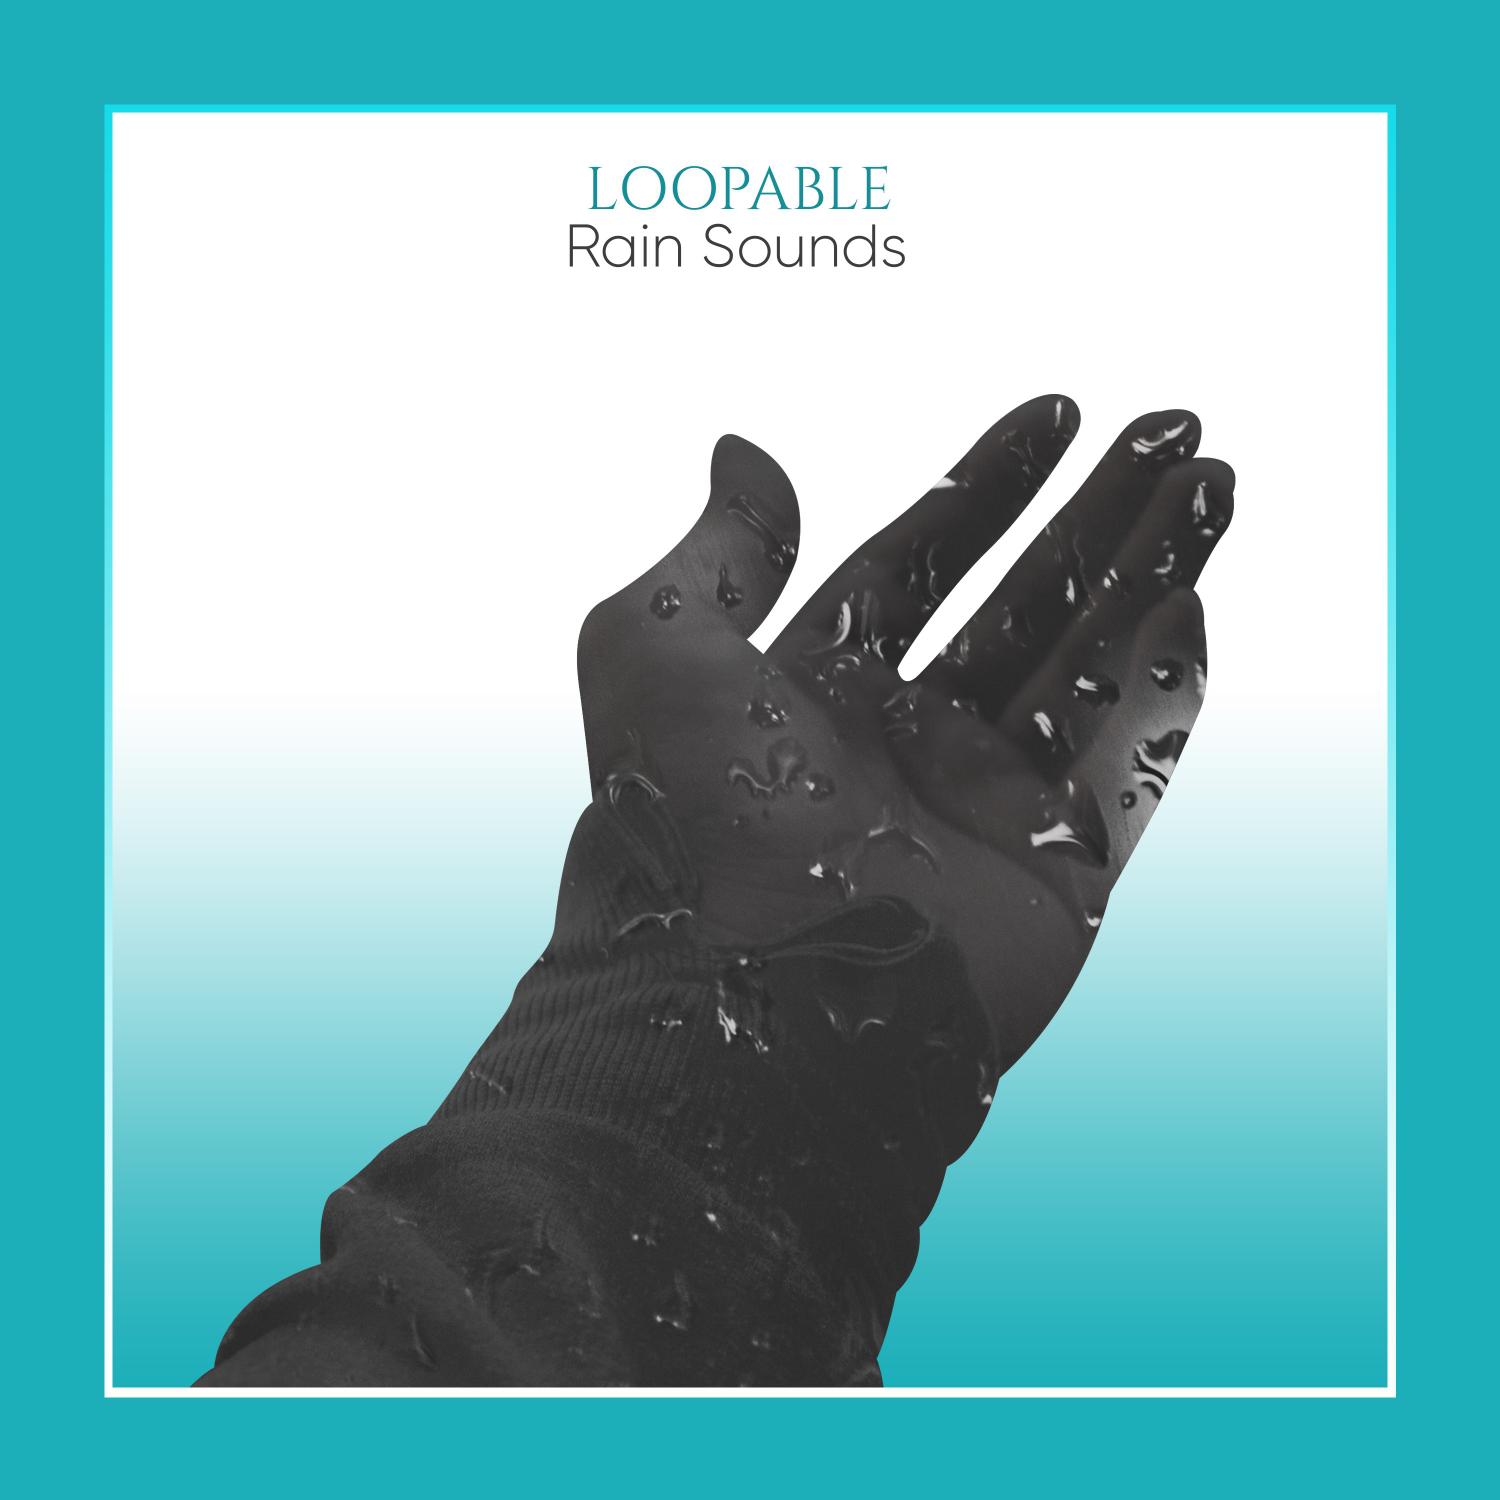 Rain Sounds: Loopable Rain Sound Meditation, Relaxing Sound of Rain, Soothing Ambient Sounds, Massage Yoga Music